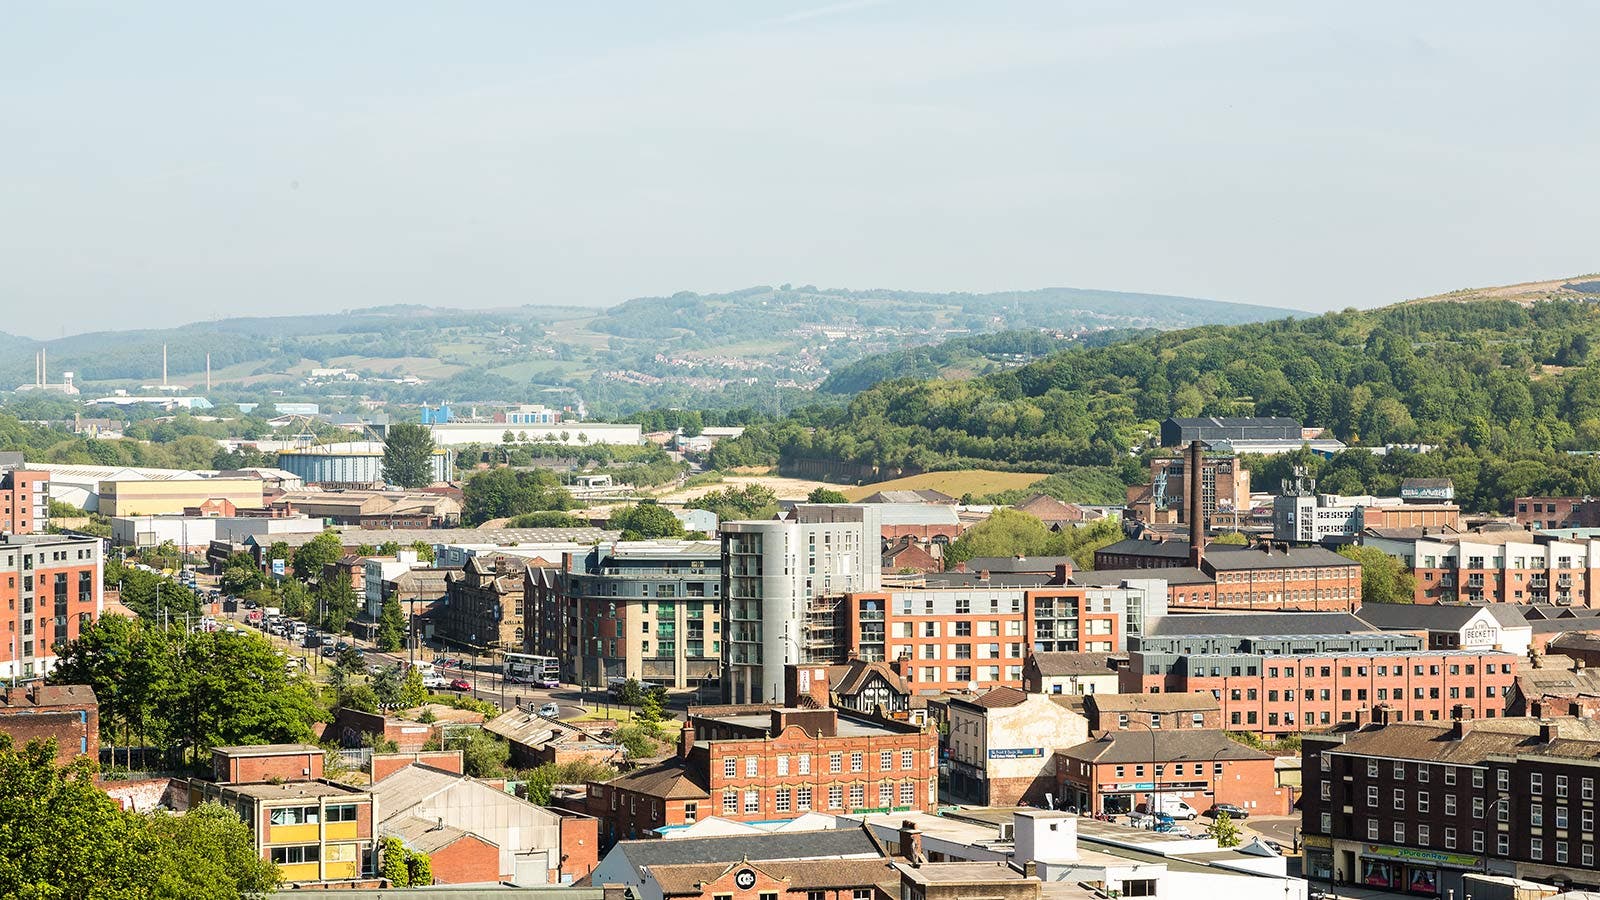 The city of Sheffield